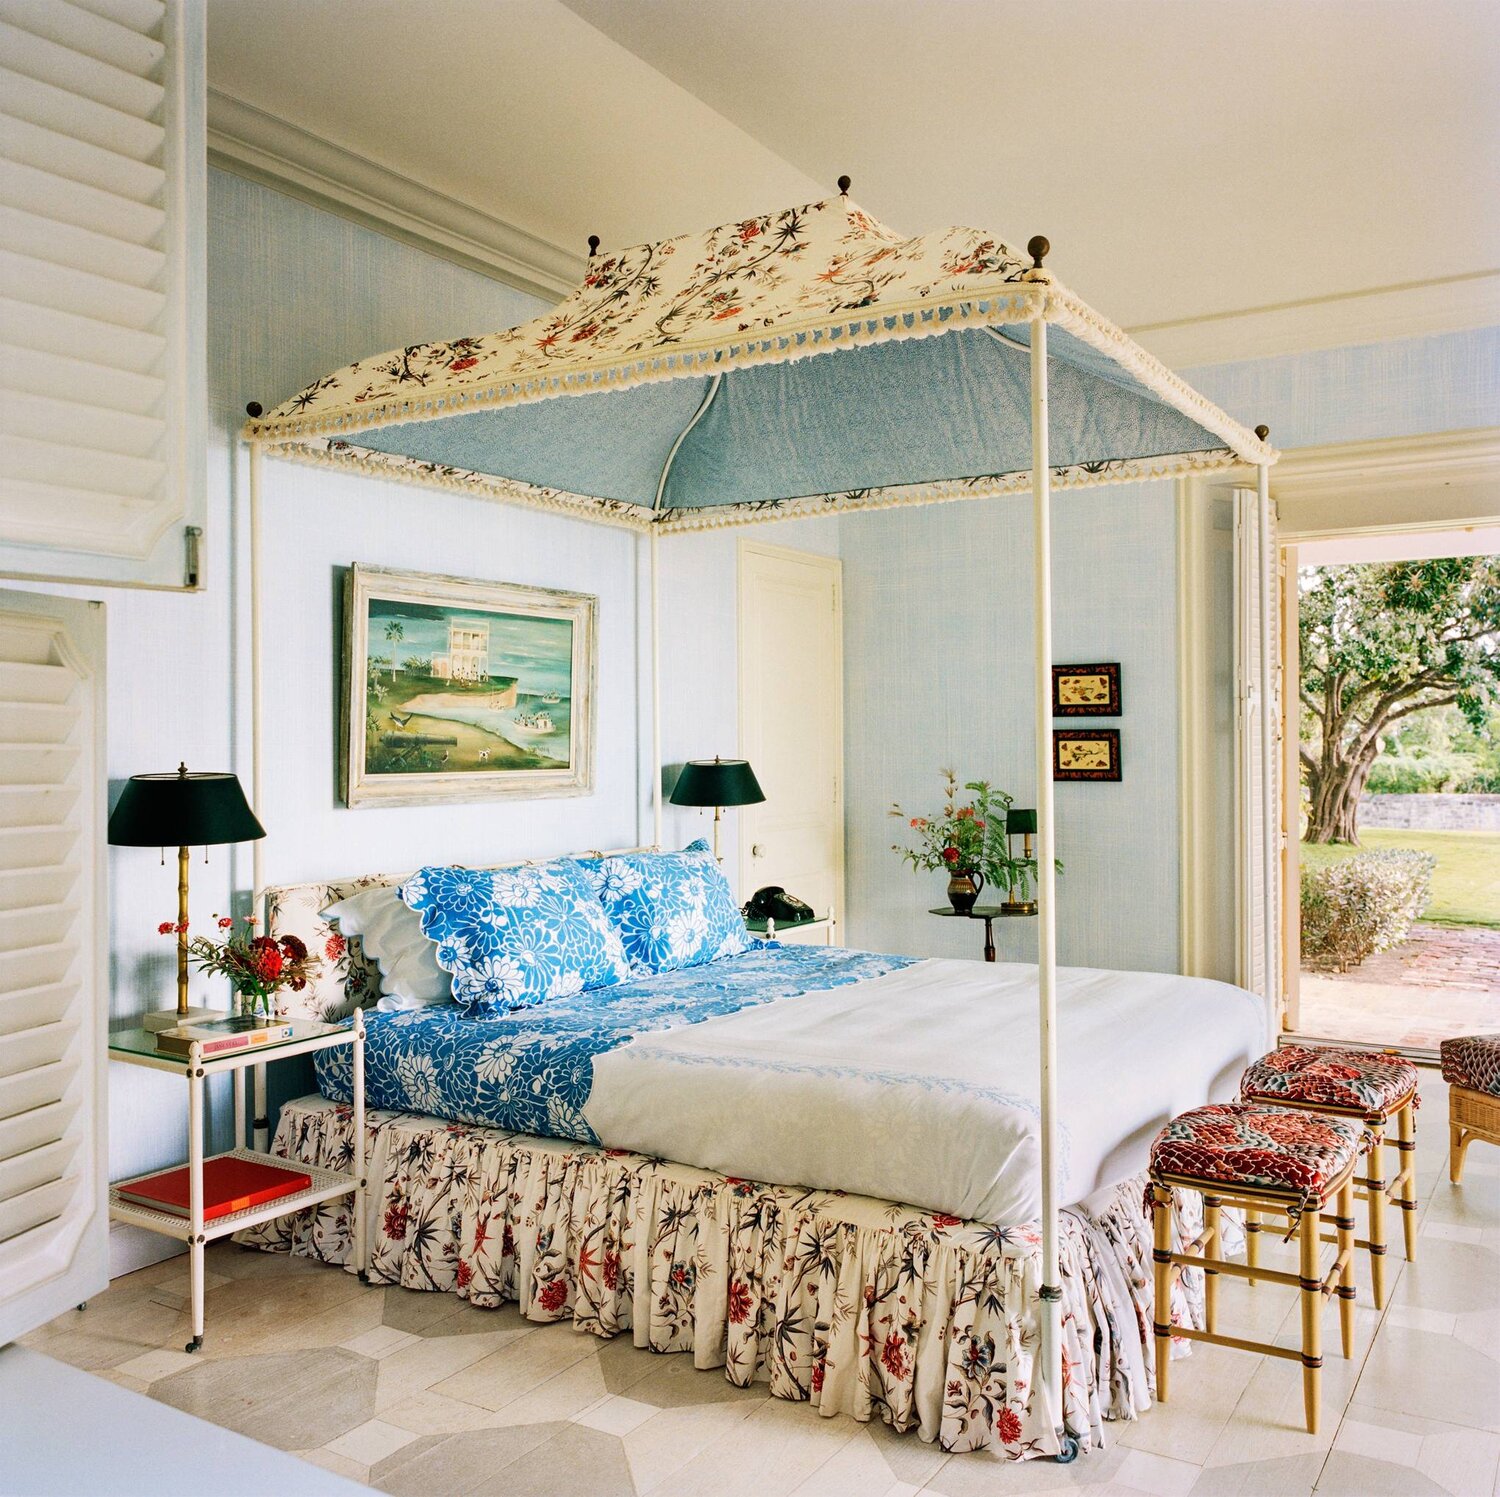 The bedroom has a charming bed that was inspired by the one Bunny Mellon had in this exact room.